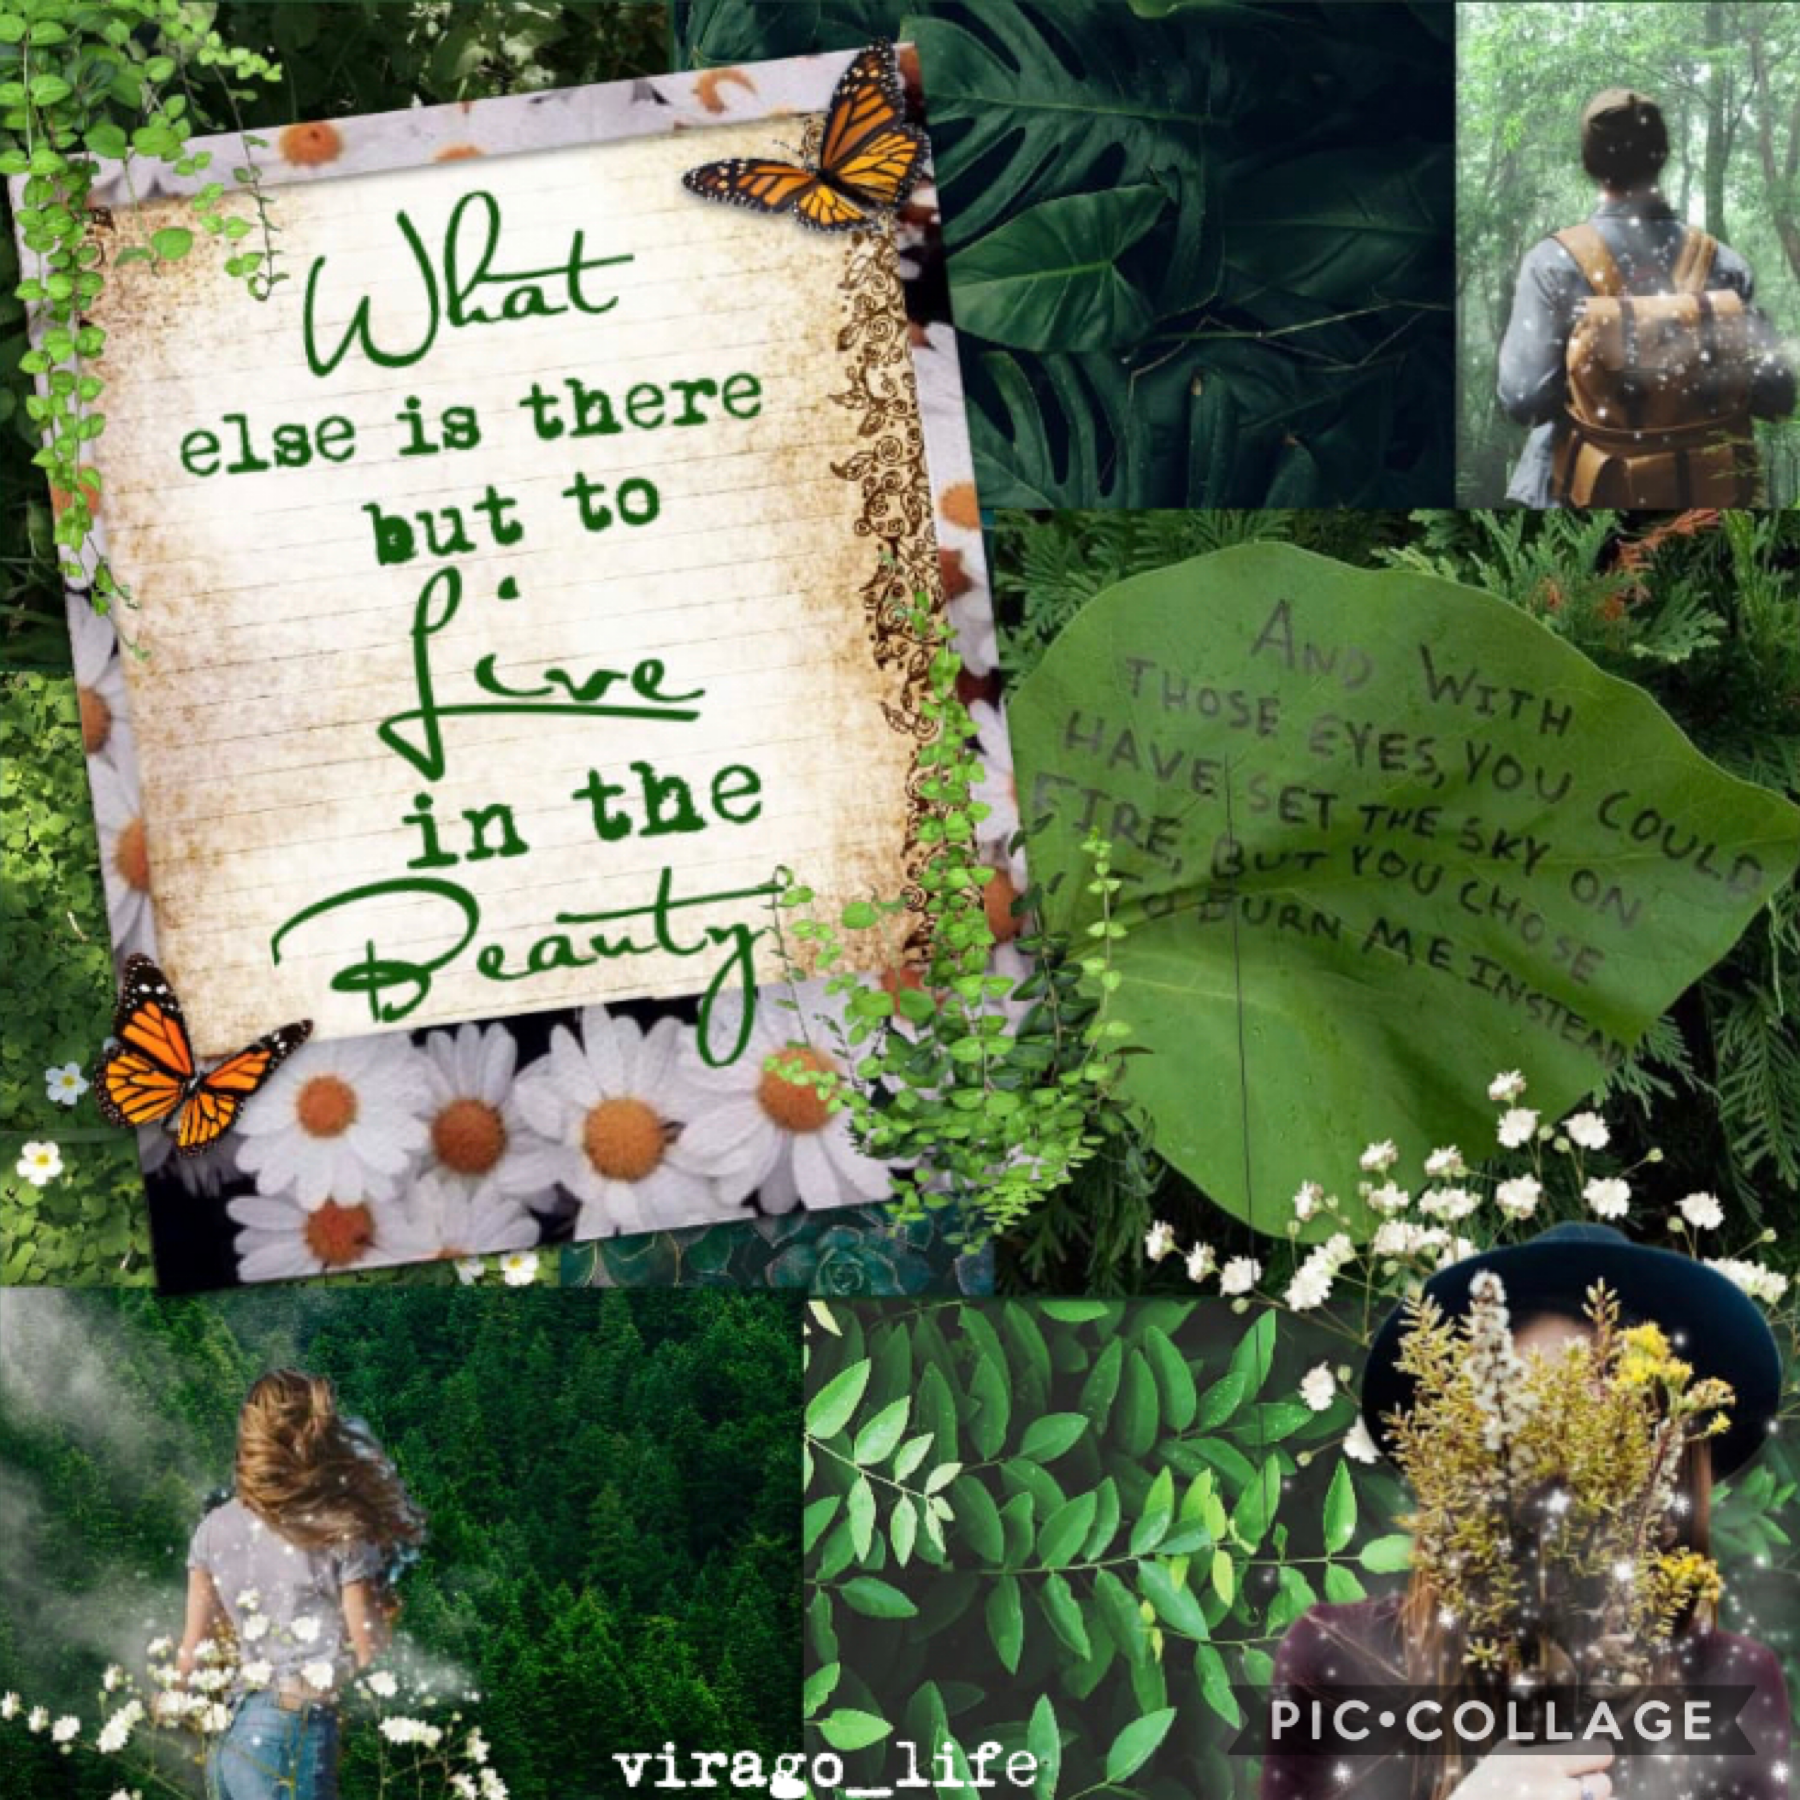 🌿tap🌿
This is my entry to @TabbyQueen ‘s last round contest!! Hope you guys enjoy!! 
Should I start qotd? Let me know what you think!! 🤔🤗